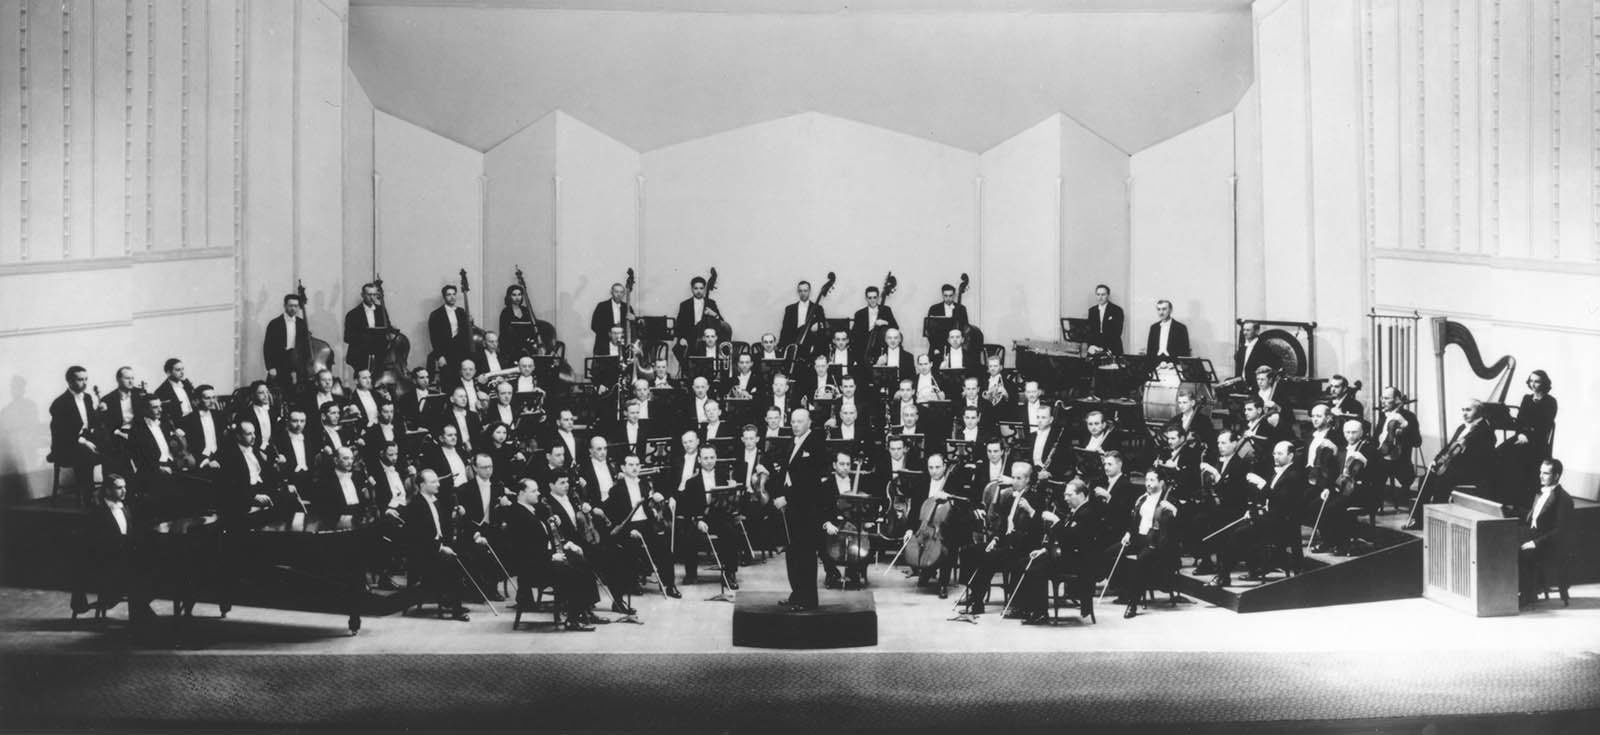 The Cleveland Orchestra and Director George Szell pose in Severance Hall. Unknown photographer, 1946. 